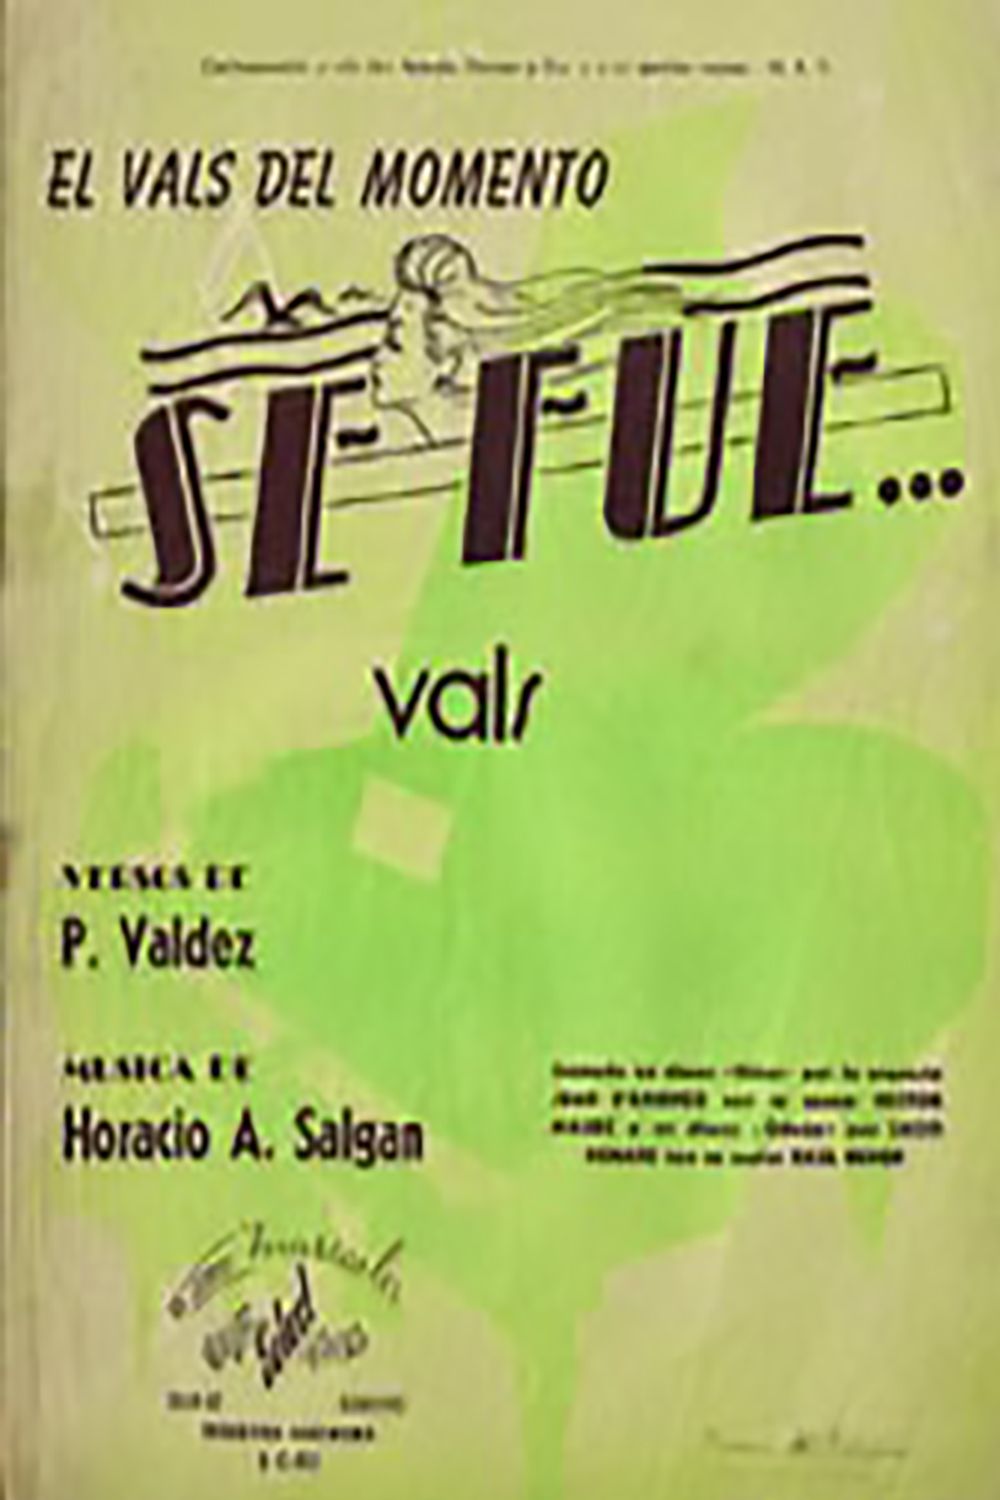 "Se fue", Argentine Tango vals music sheet cover.